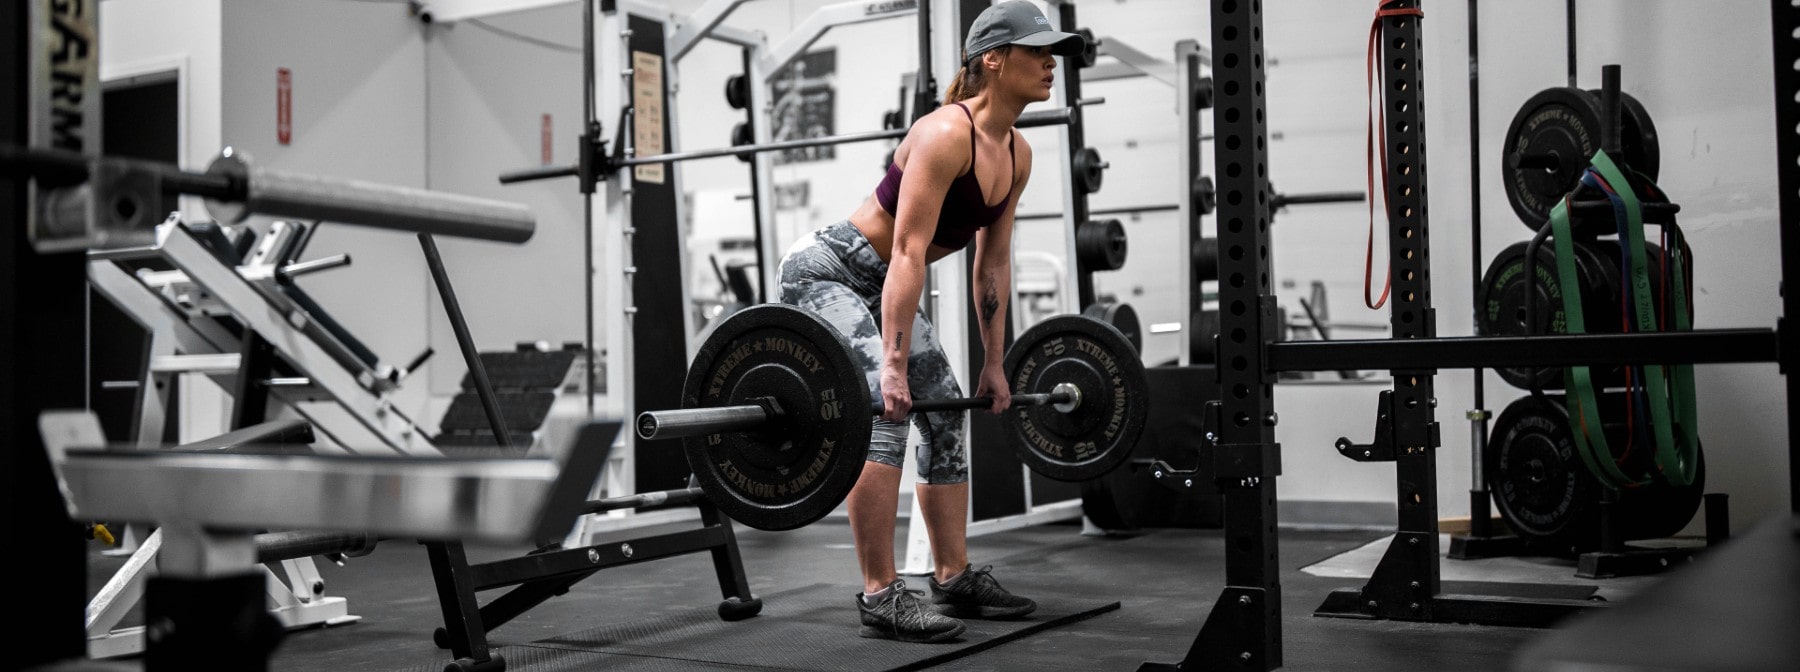 Weightlifting Playlist | Get In The Zone To Lift Heavy